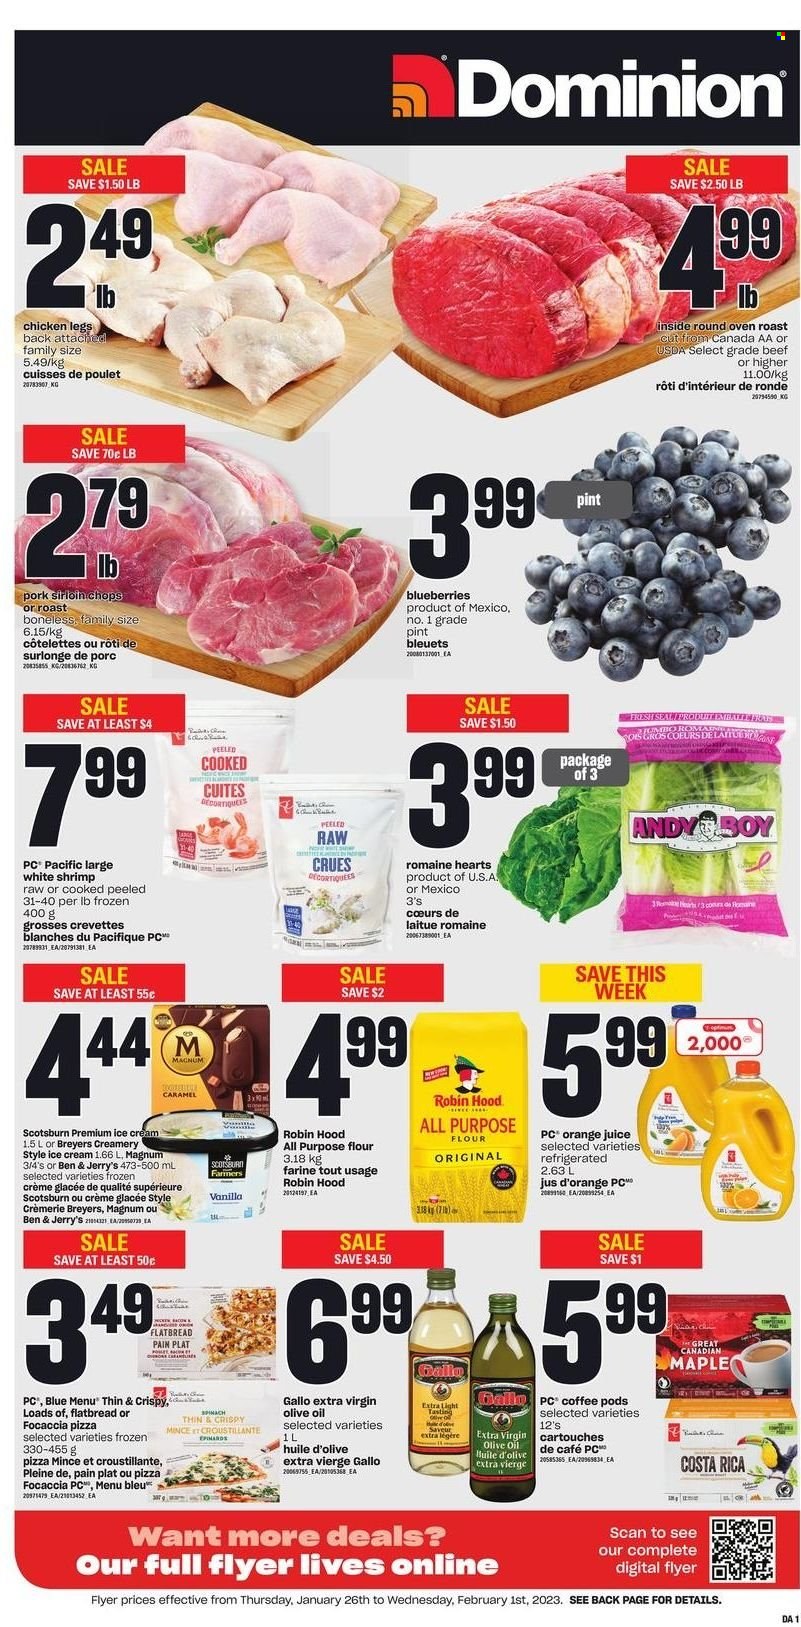 thumbnail - Dominion Flyer - January 26, 2023 - February 01, 2023 - Sales products - focaccia, flatbread, blueberries, shrimps, pizza, Magnum, ice cream, Ben & Jerry's, all purpose flour, flour, extra virgin olive oil, olive oil, oil, orange juice, juice, coffee, coffee pods, chicken legs, chicken, pork loin, Optimum. Page 1.